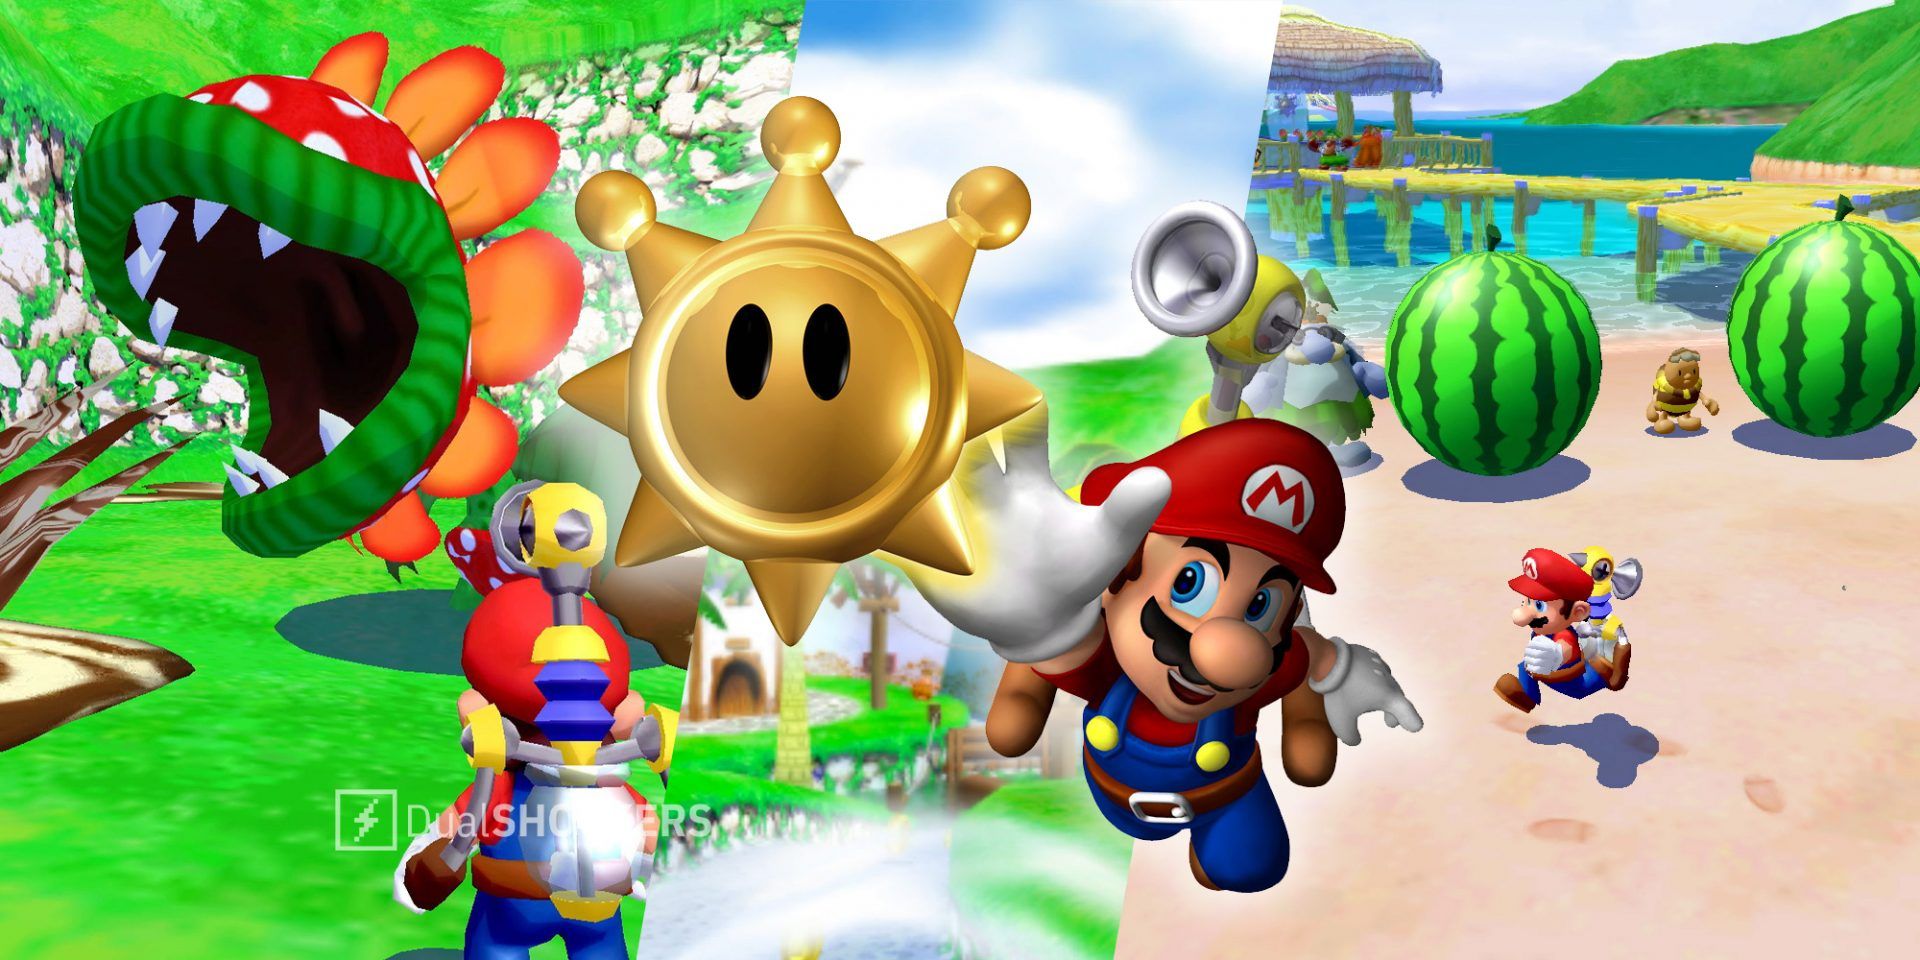 Super Mario Sunshine Mario and Petey Piranha on left, Mario with a Shine in middle, Mario with watermelons on right